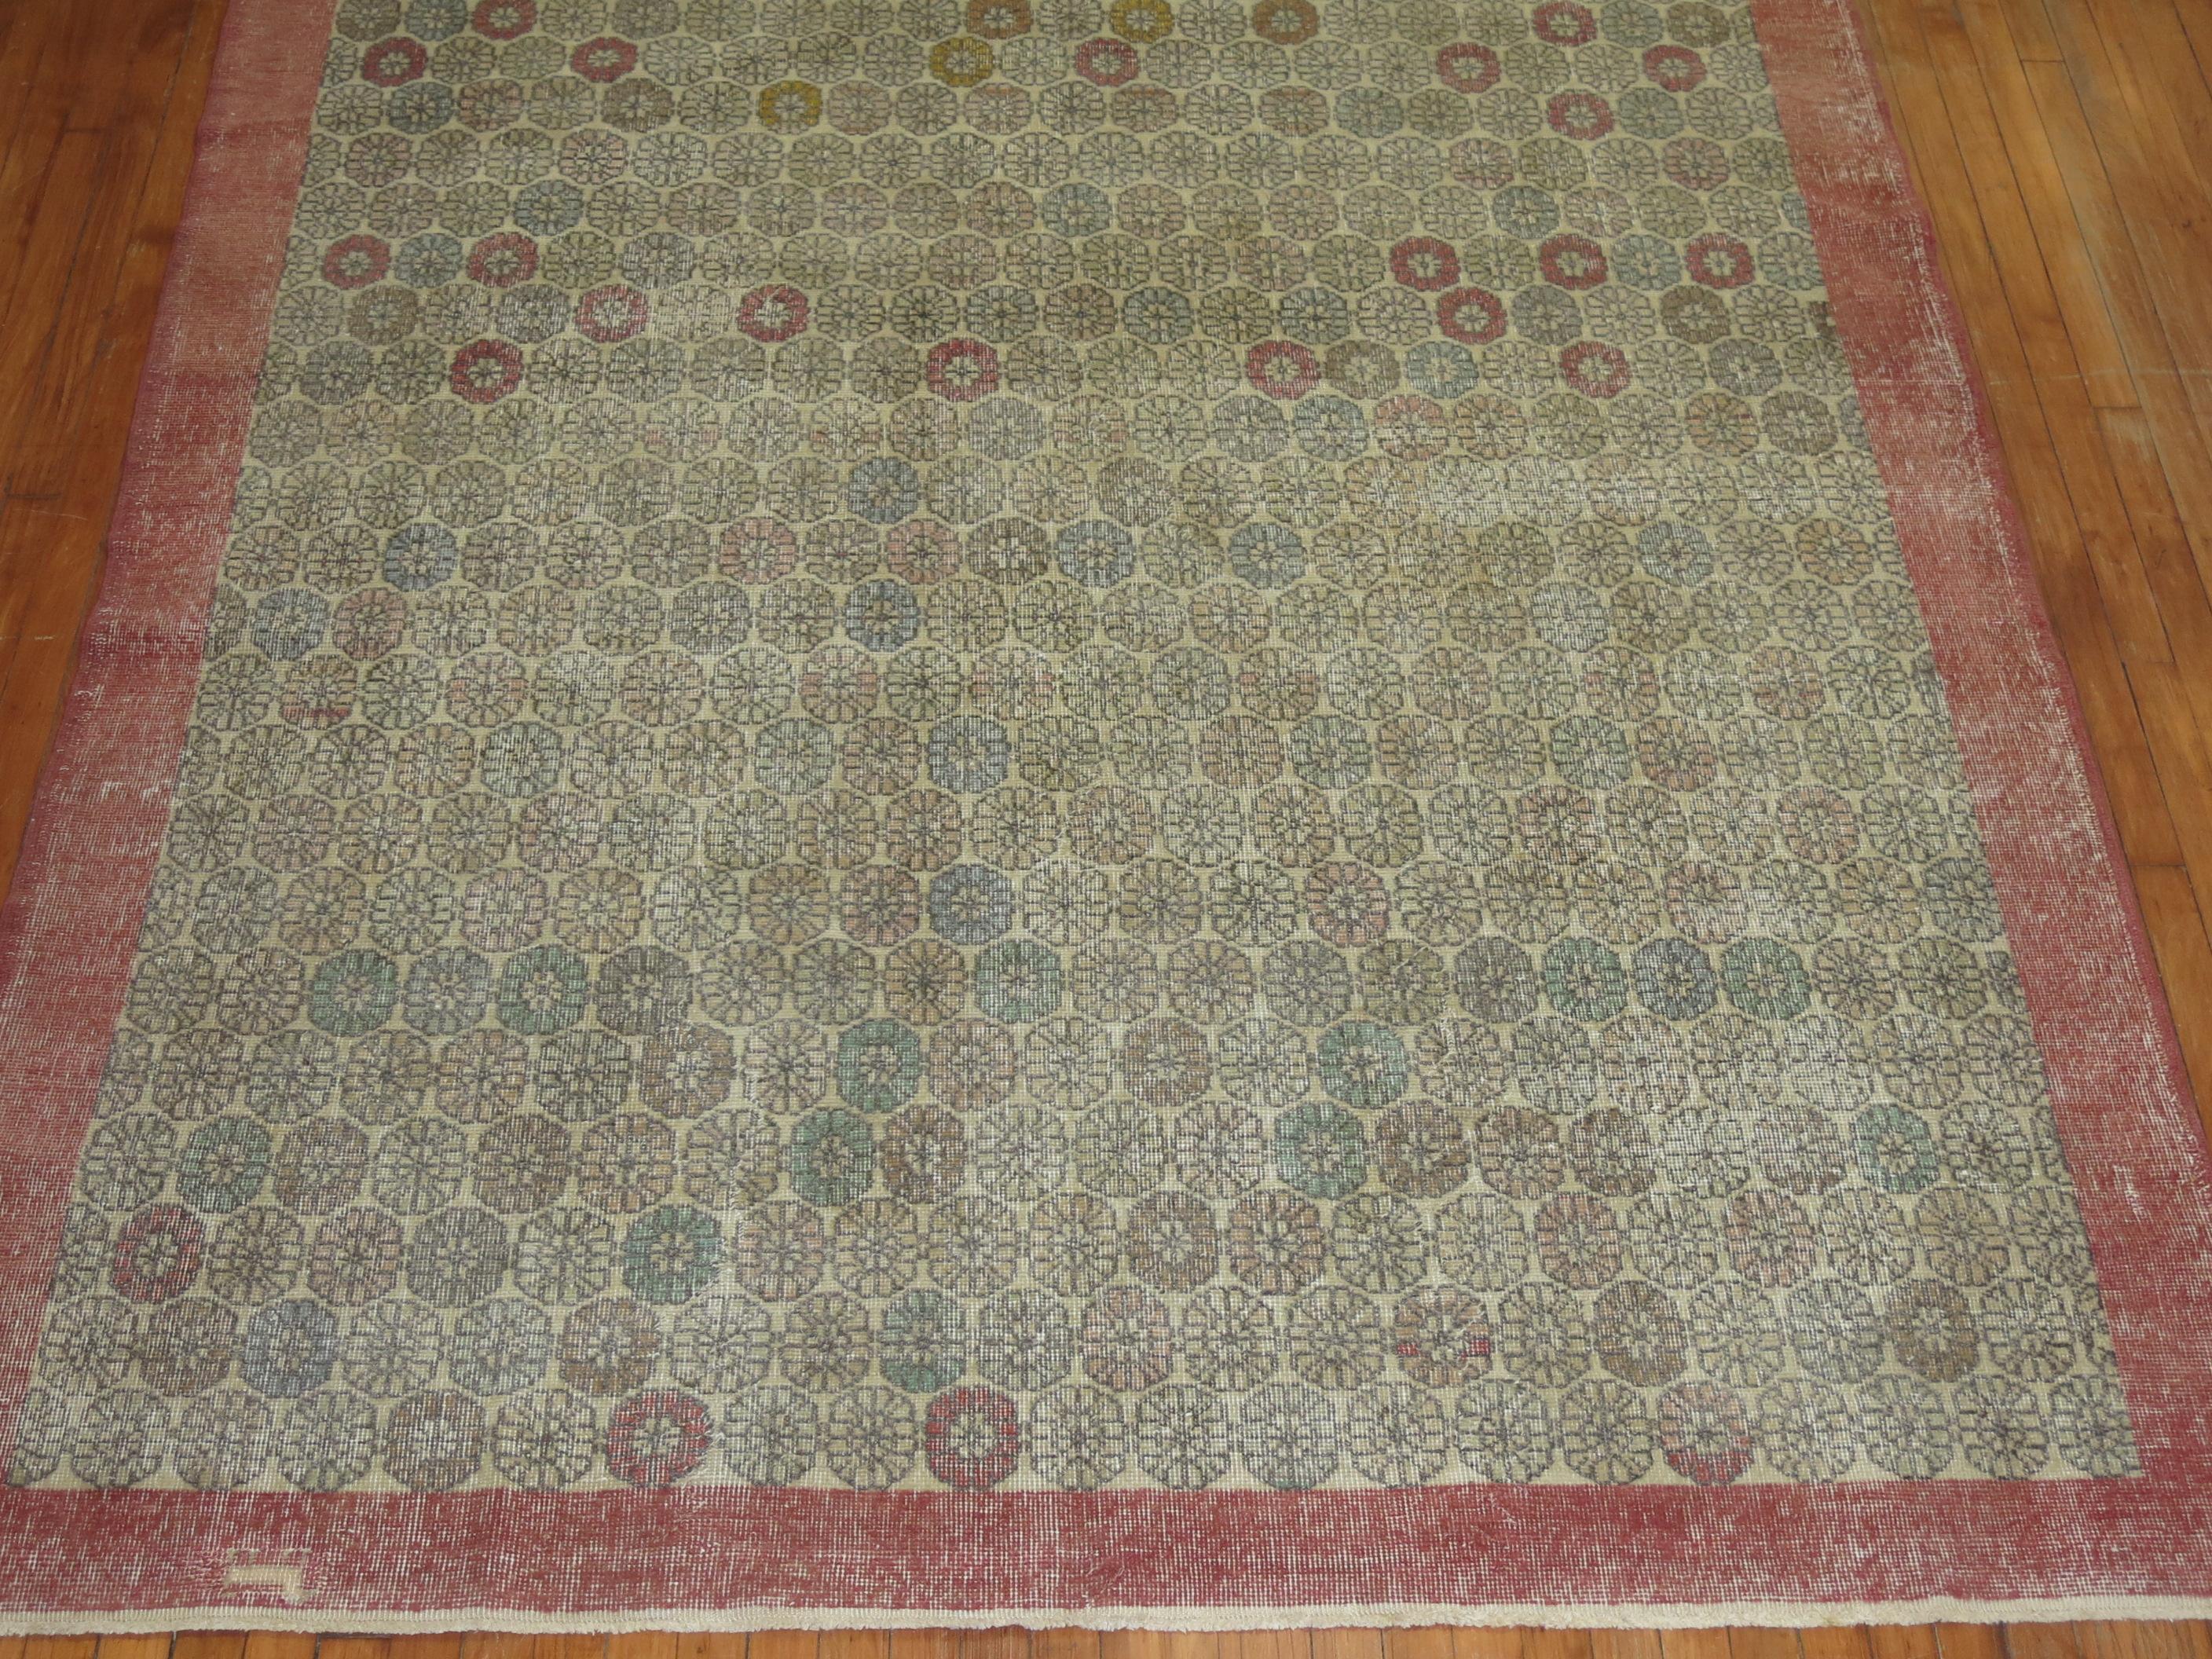 A Vintage Turkish deco rug from the mid-20th century.